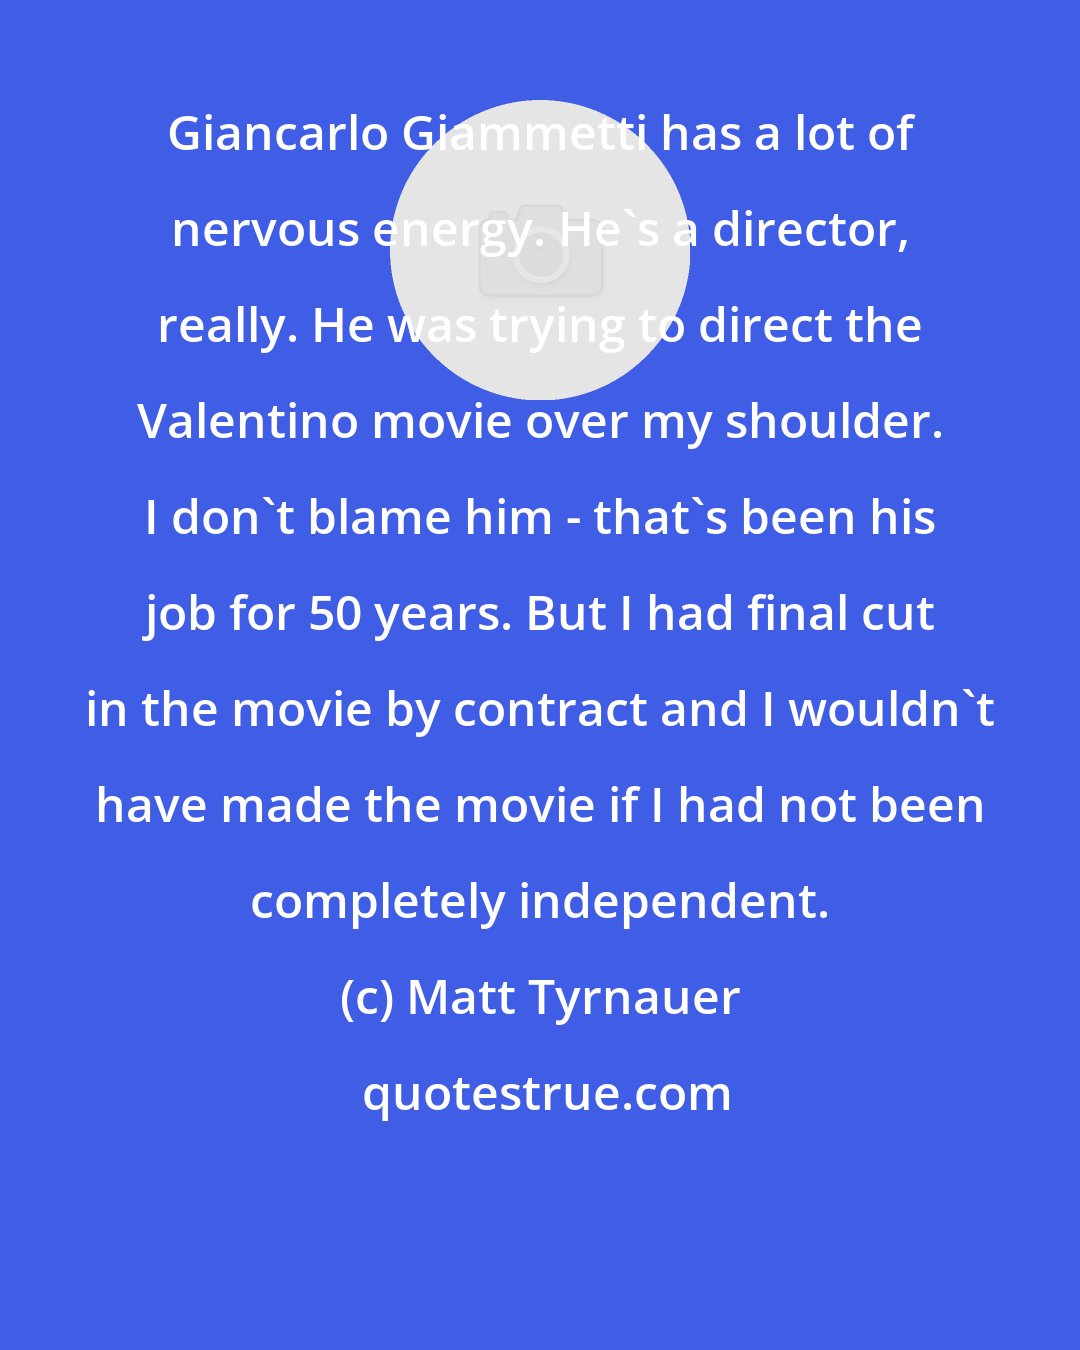 Matt Tyrnauer: Giancarlo Giammetti has a lot of nervous energy. He's a director, really. He was trying to direct the Valentino movie over my shoulder. I don't blame him - that's been his job for 50 years. But I had final cut in the movie by contract and I wouldn't have made the movie if I had not been completely independent.